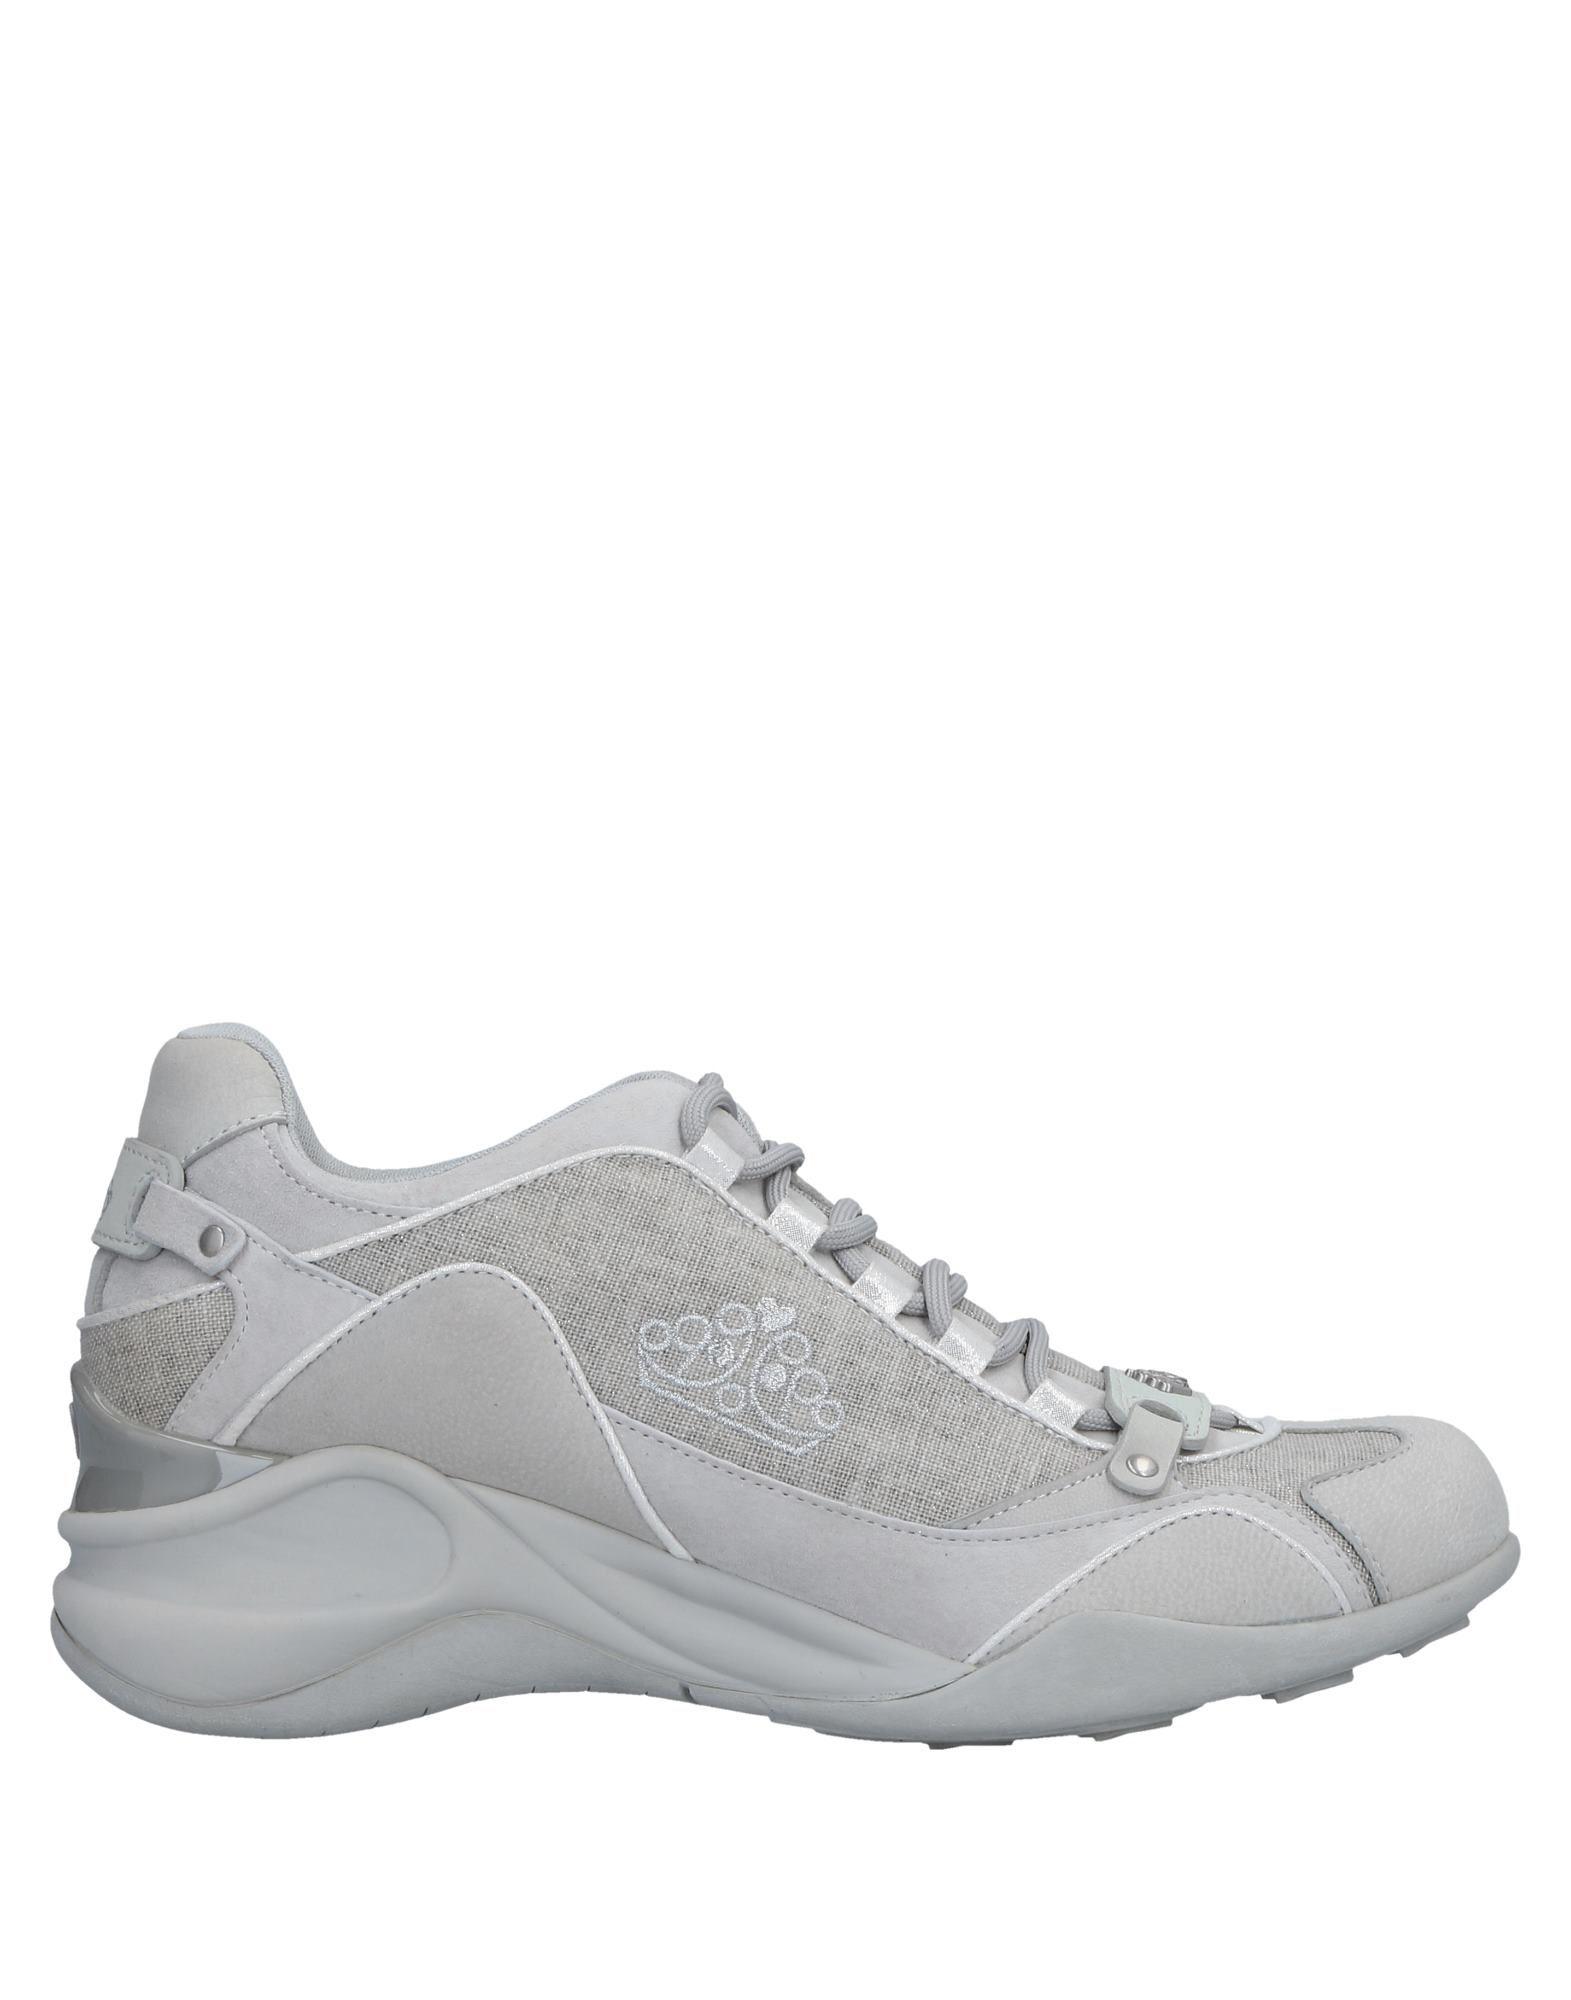 Fornarina Sportglam Rubber Low-tops & Sneakers in Grey (Gray) - Lyst